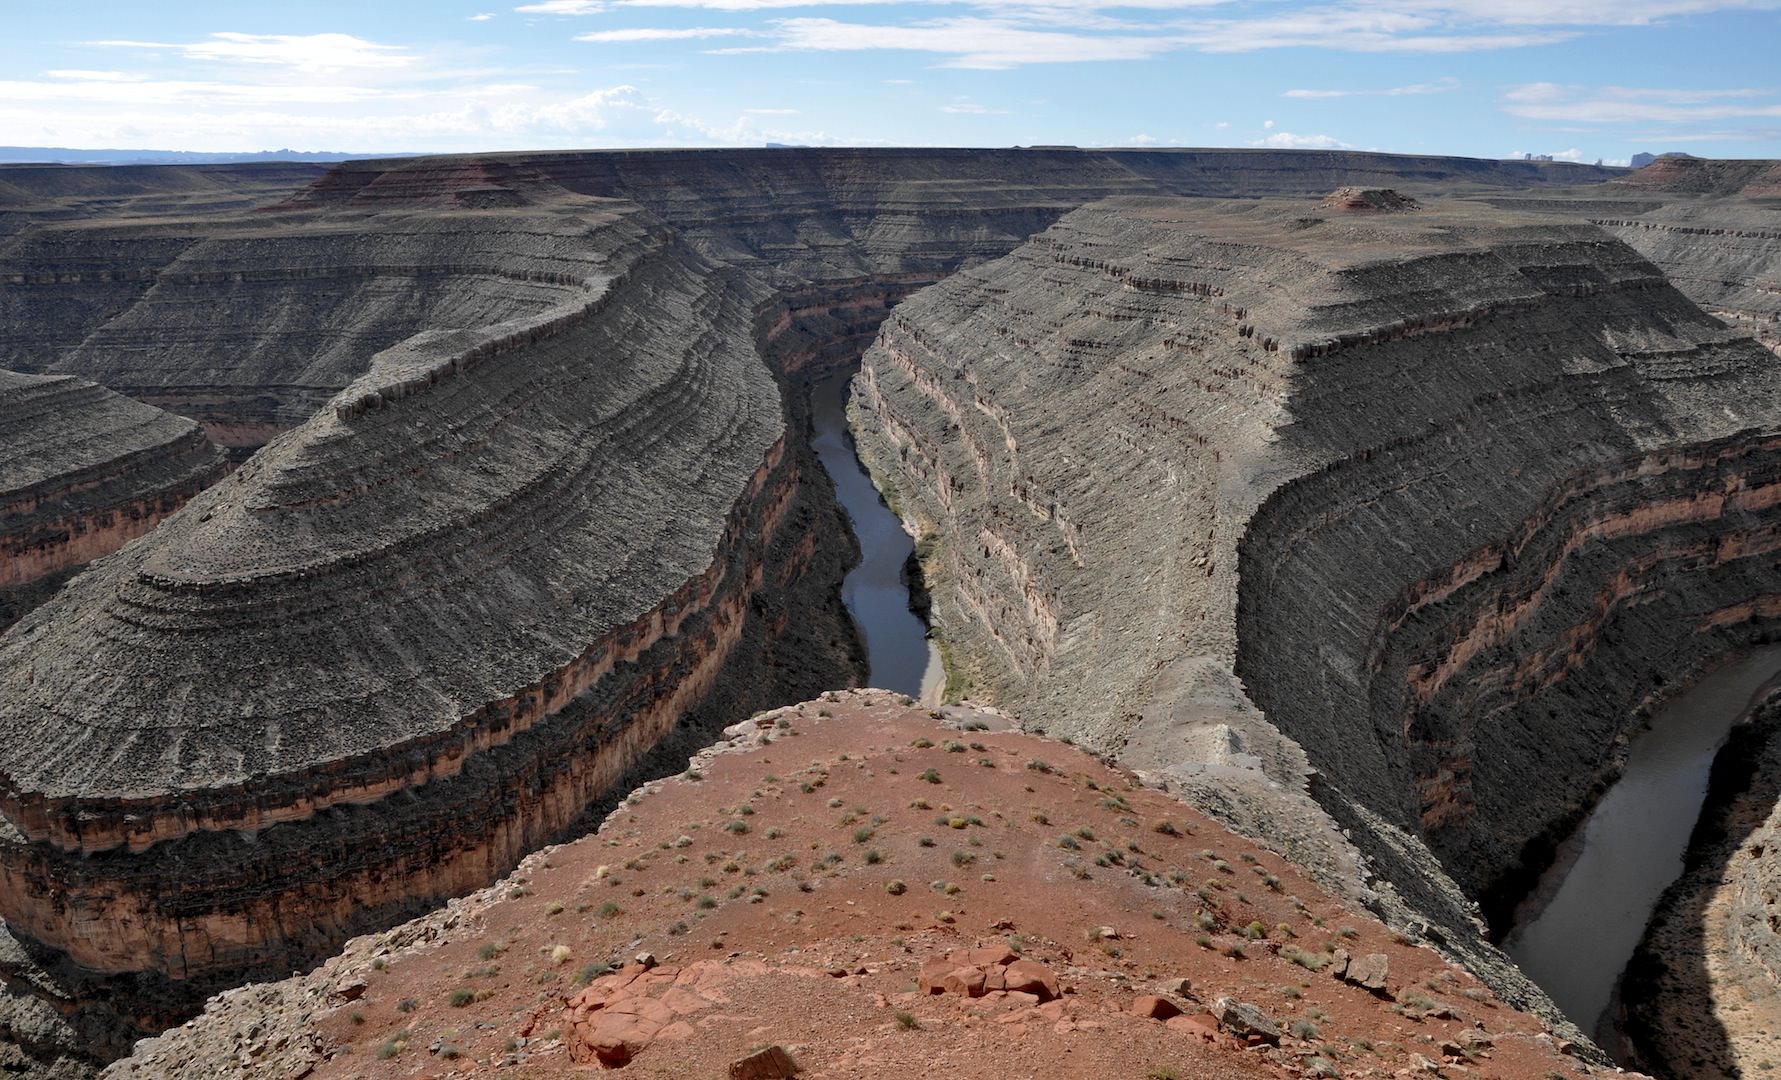 An entrenched meander along the San Juan River